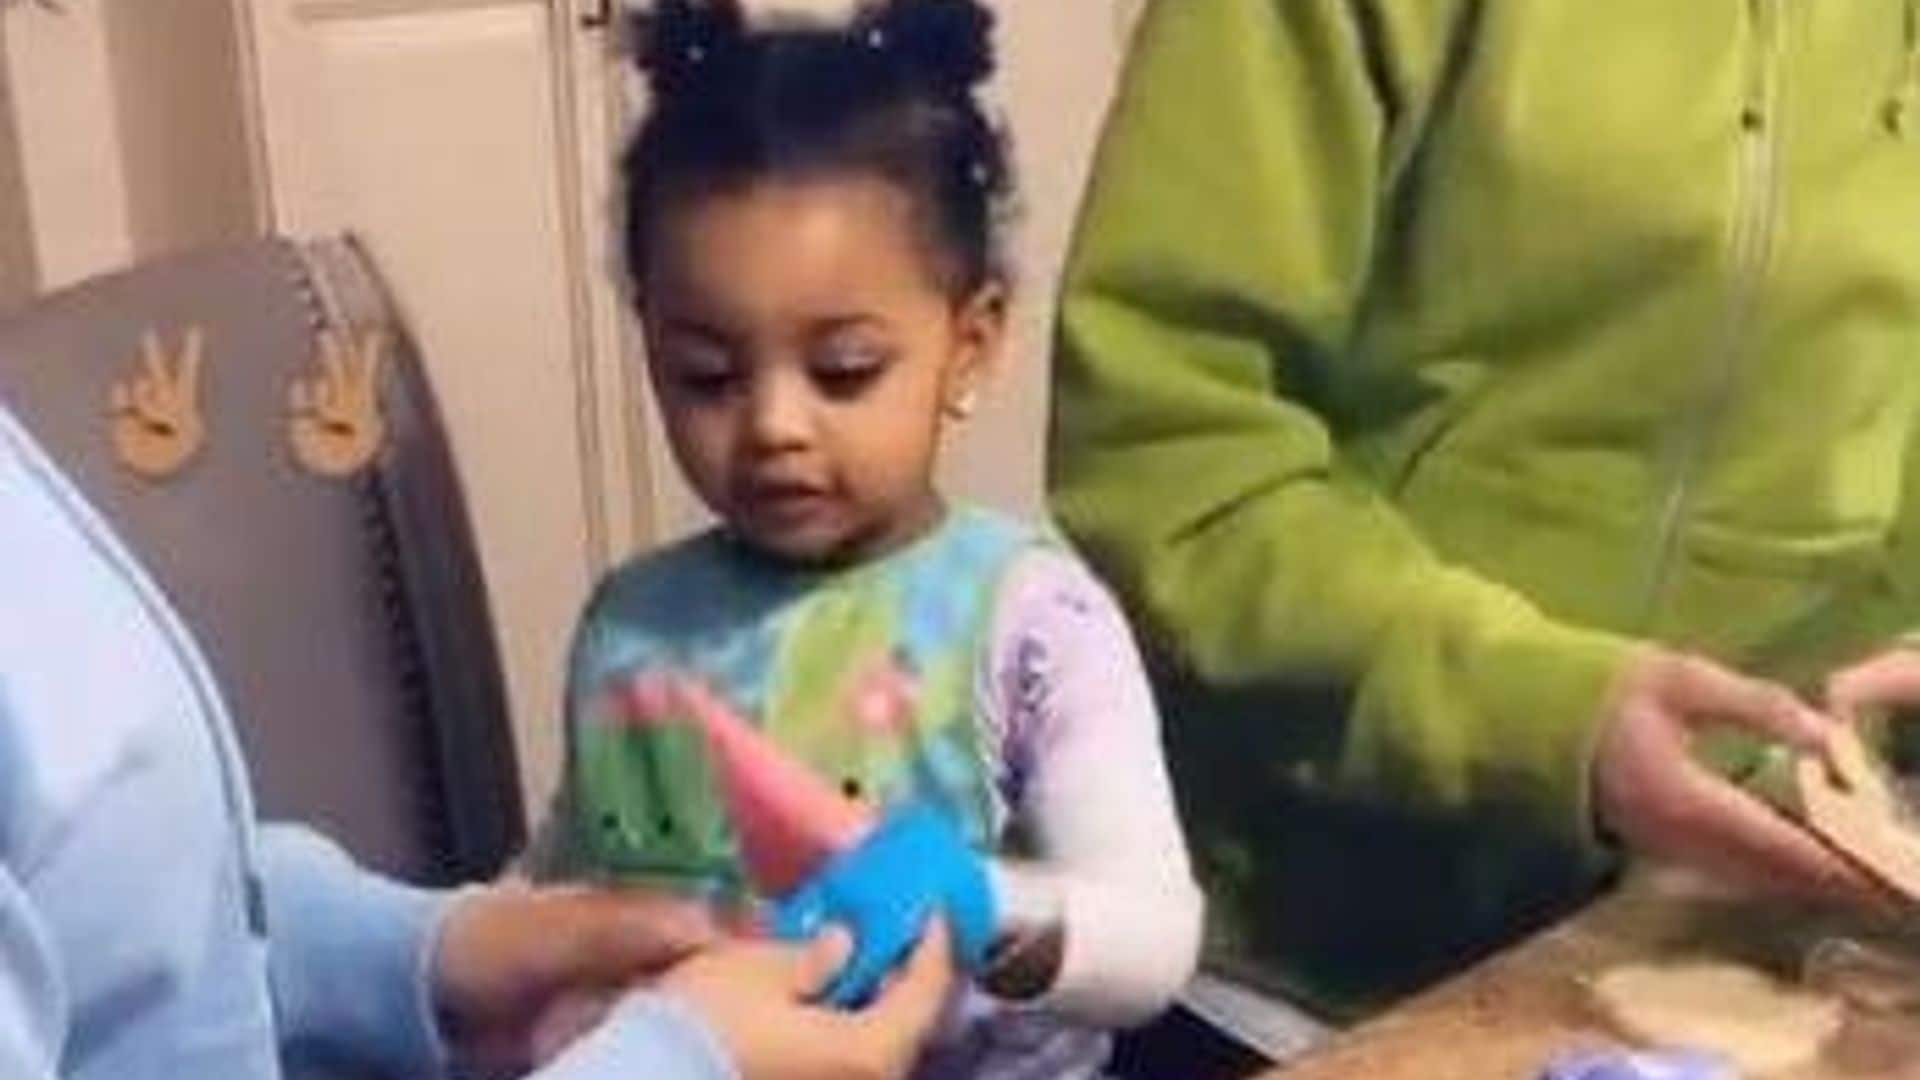 Cardi B’s daughter Kulture makes cookies while mom takes a nap ‘till tomorrow’